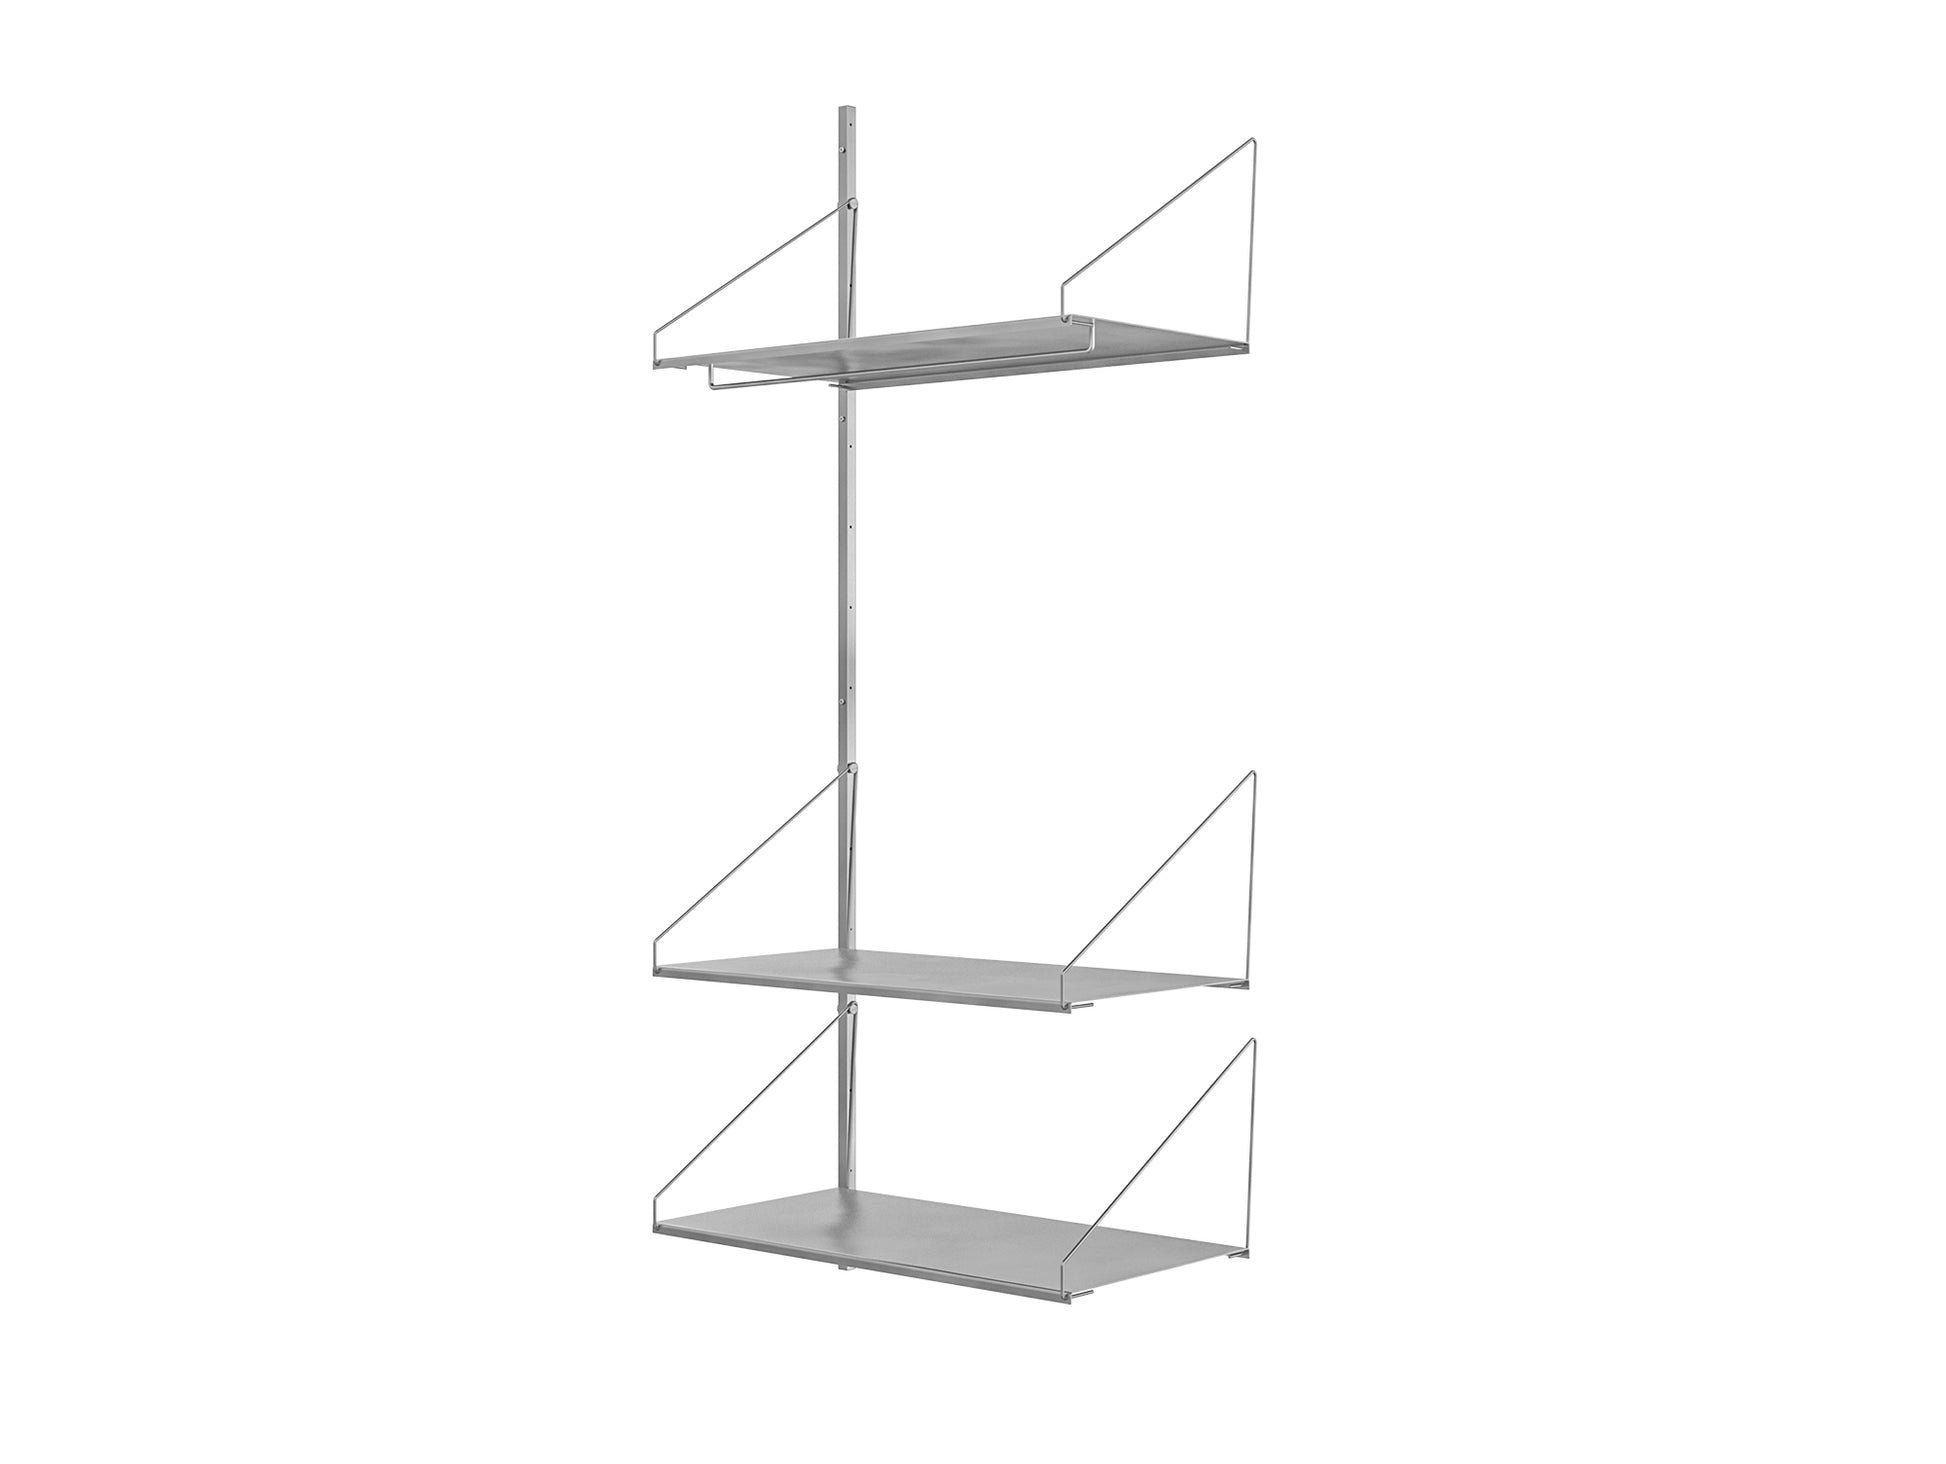 Shelf Library Stainless Steel Add-ons by Frama - H1852 / Hanger Section